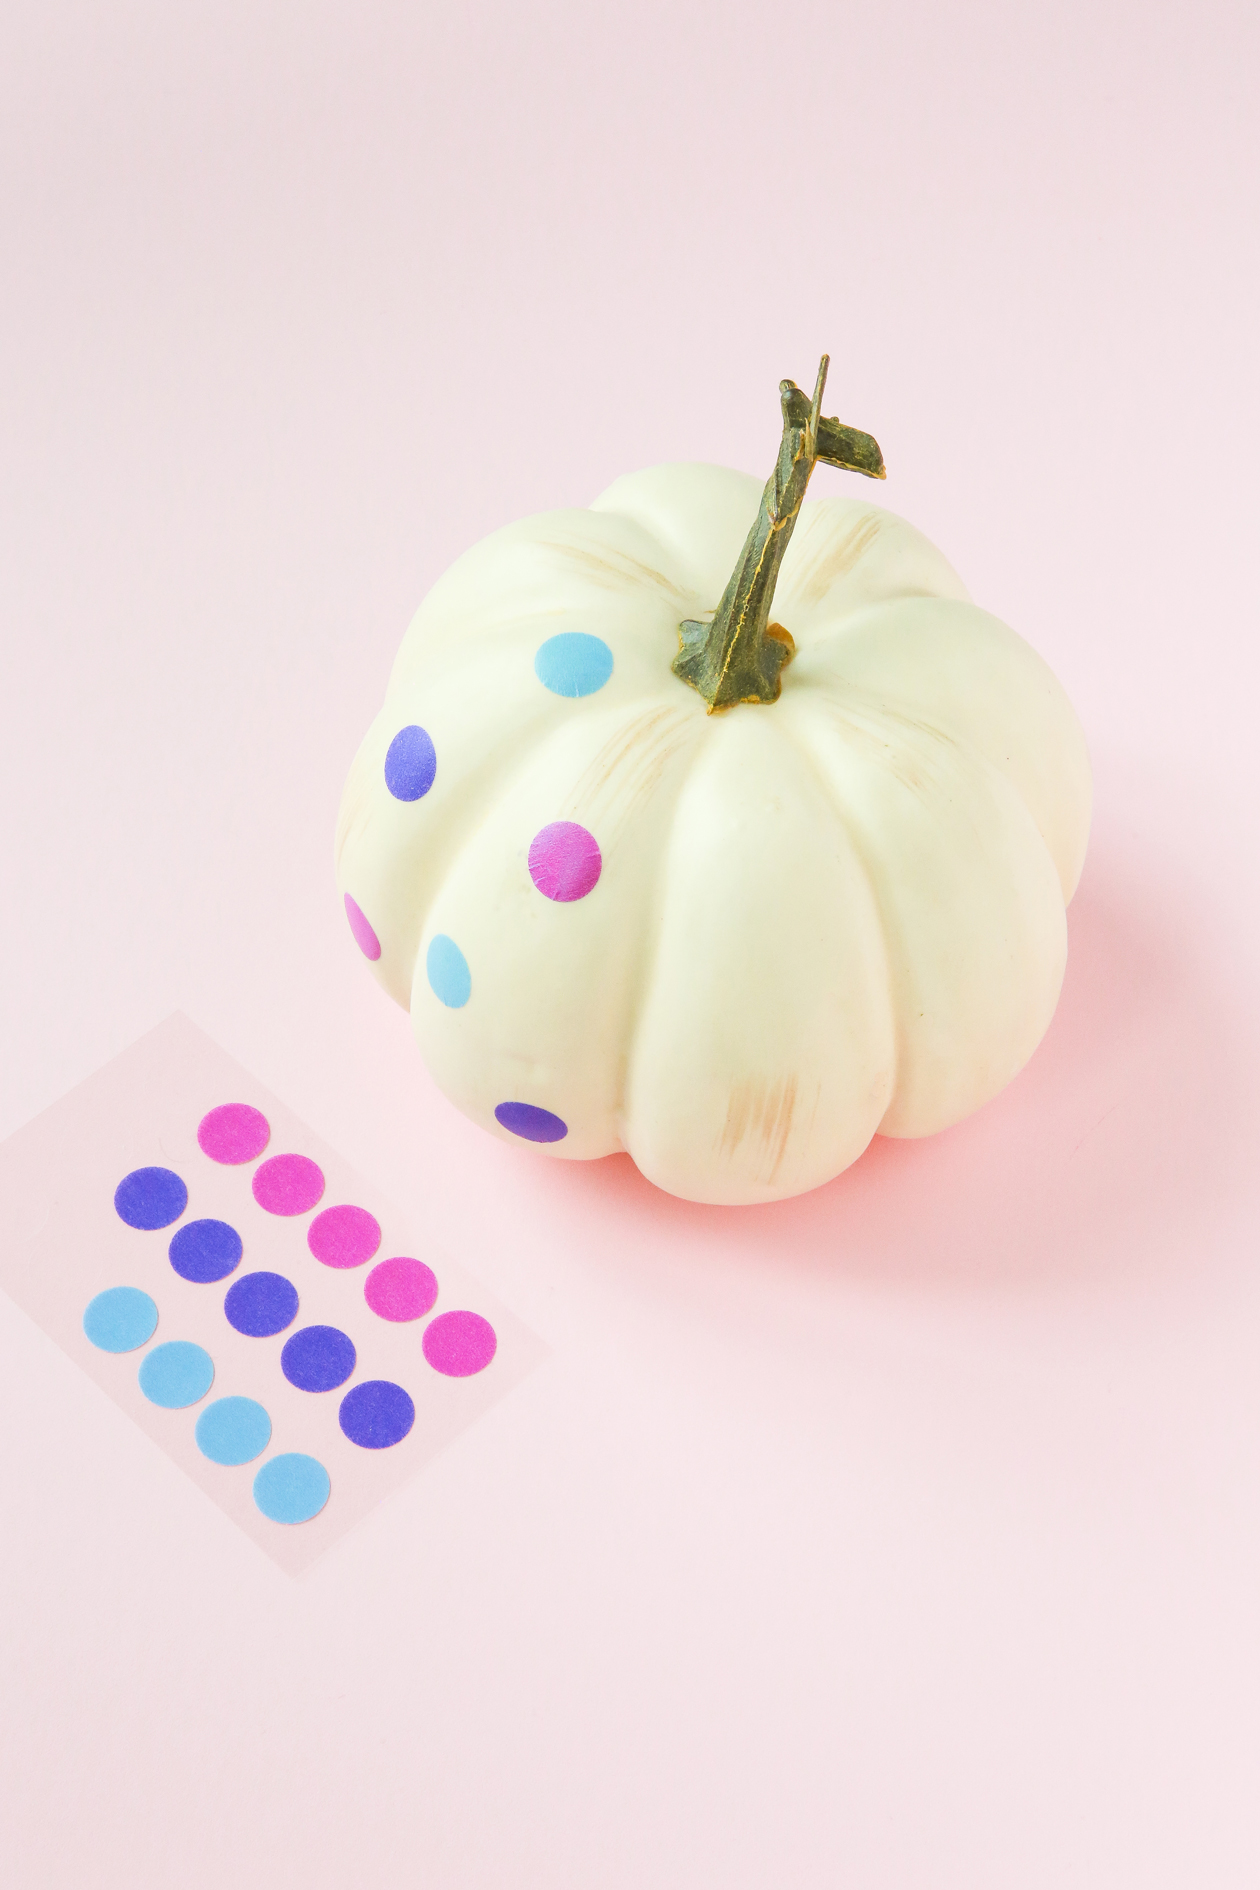 Learn how to make this DIY Polka Dot Pumpkin in 10 minutes or less!